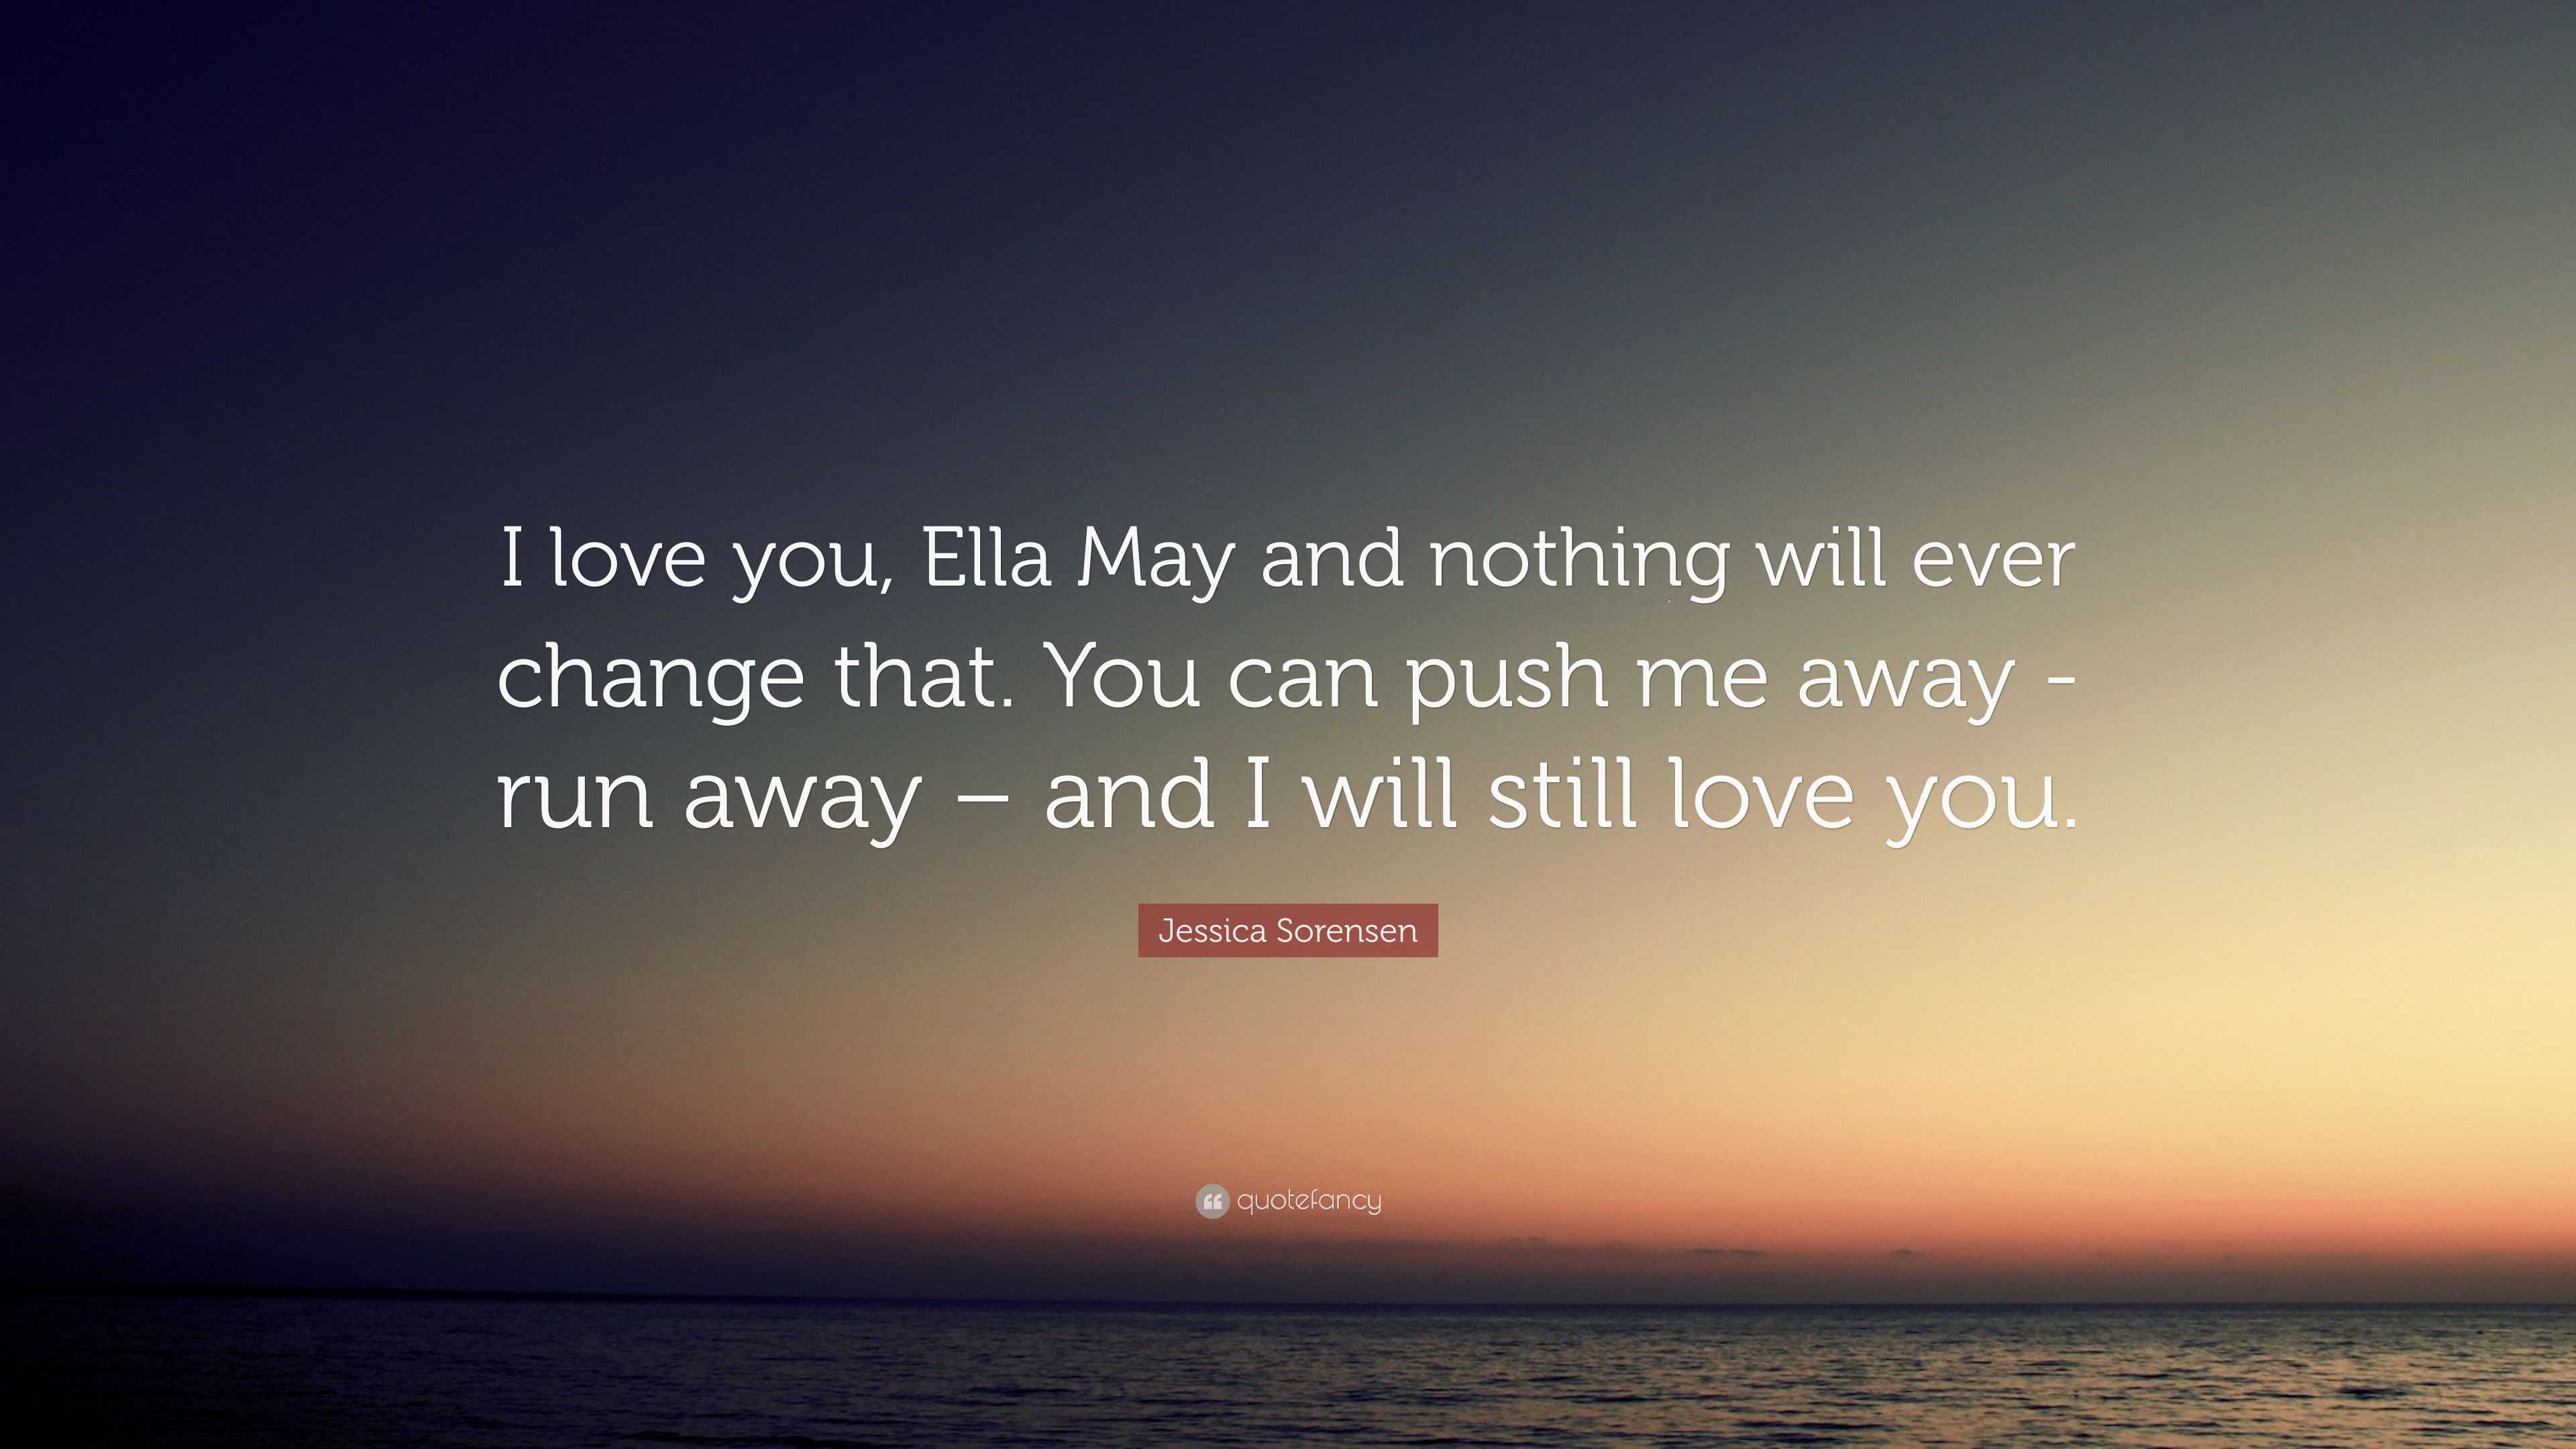 Jessica Sorensen Quote “I love you Ella May and nothing will ever change